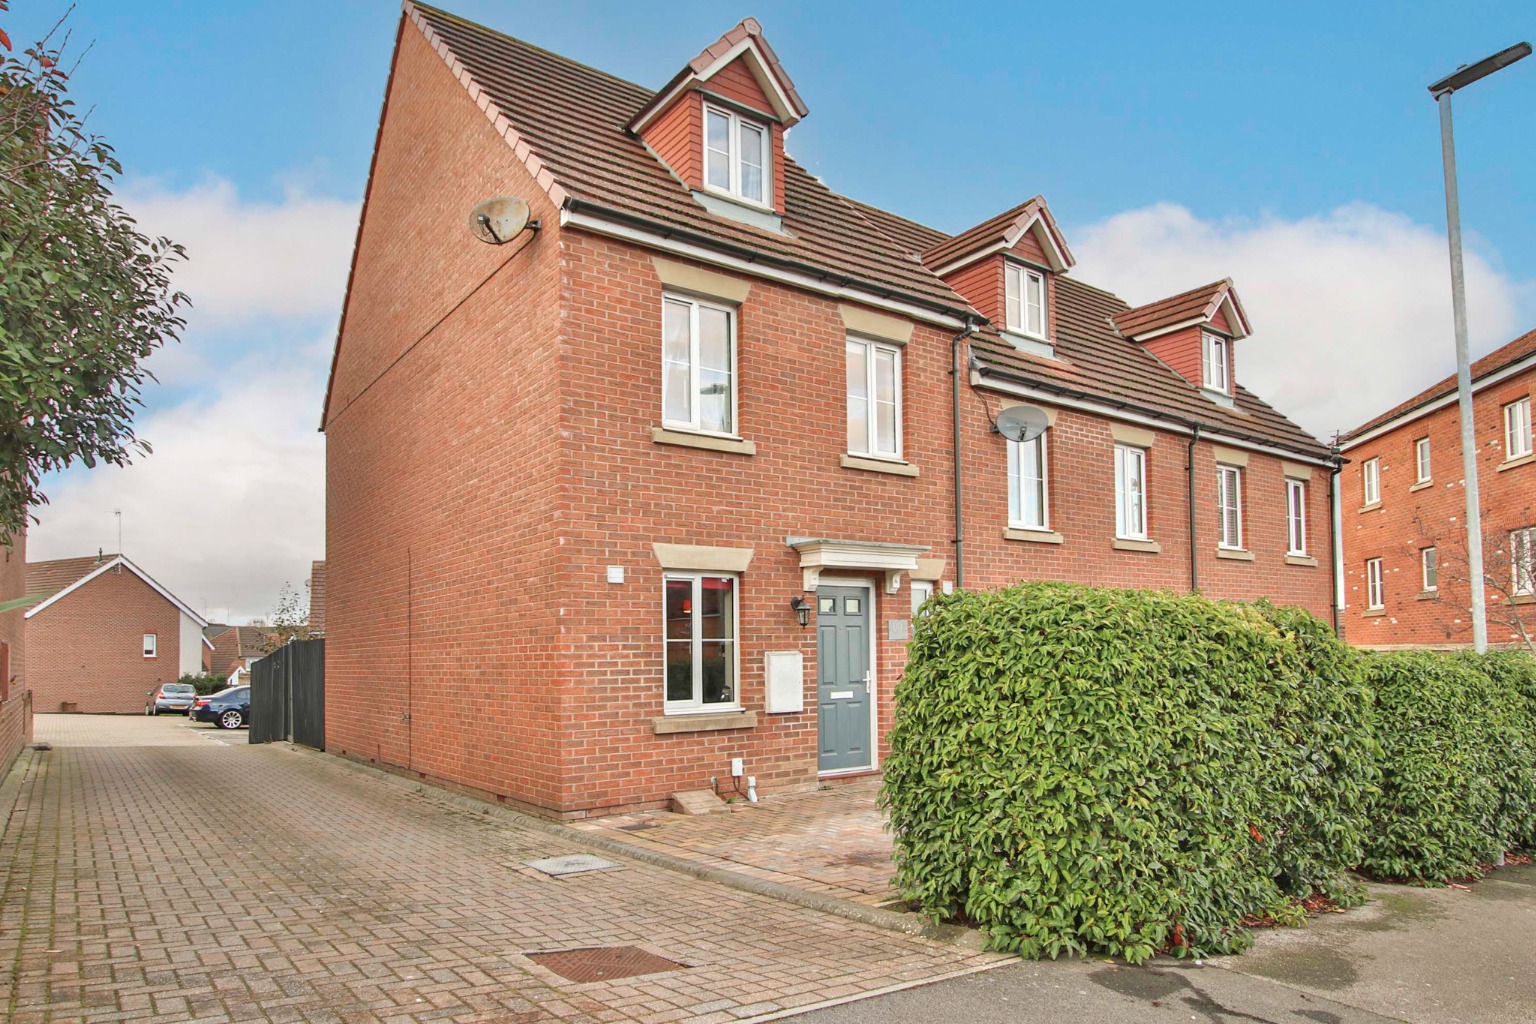 3 bed end of terrace house for sale in Clipson Crest, Barton-Upon-Humber, DN18